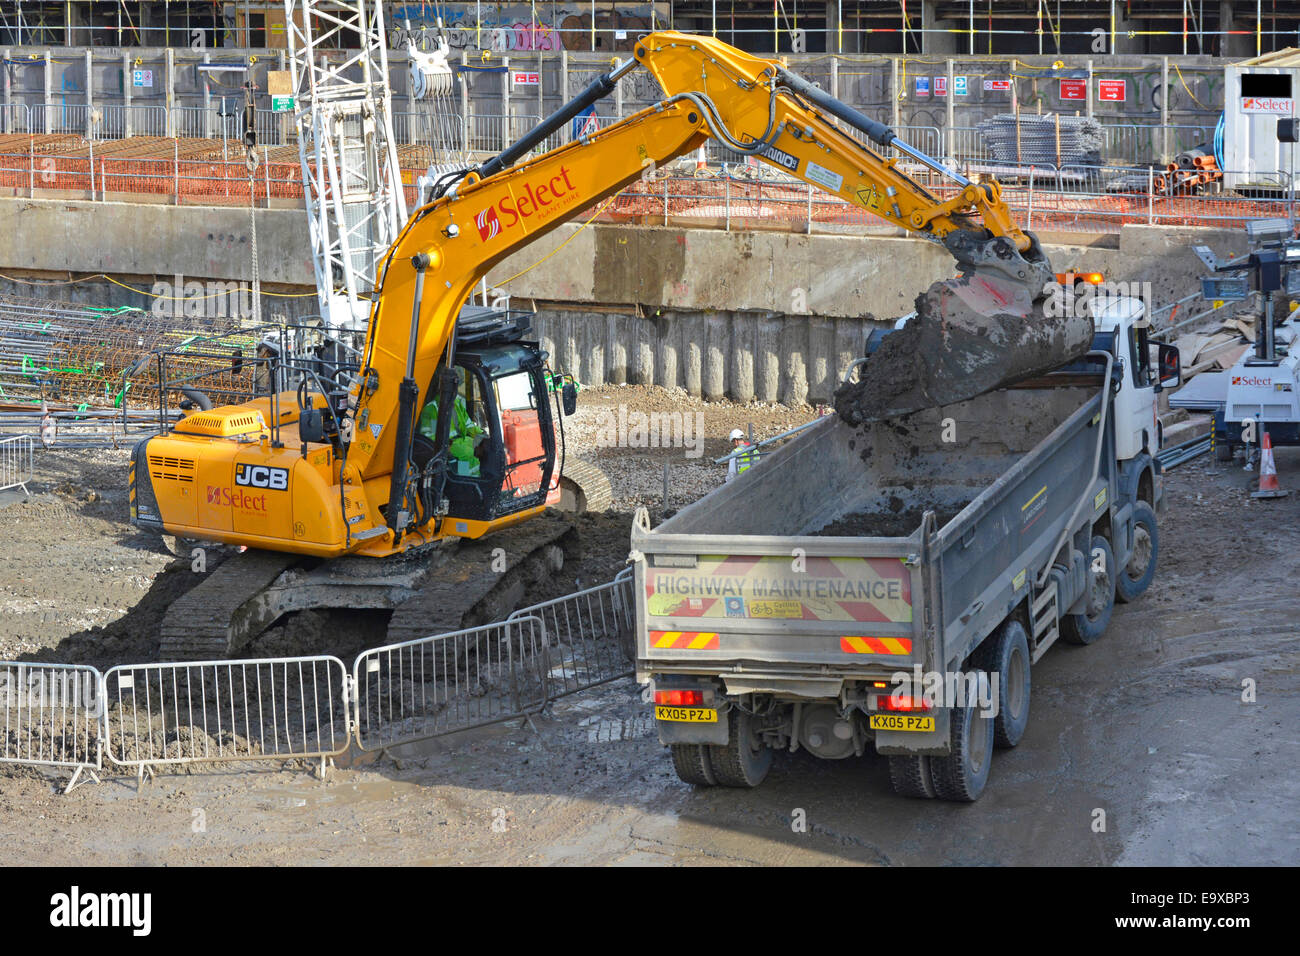 JCB excavator digger loading a tipper lorry with earth from basement construction at the Elephant & Castle regeneration project London England UK Stock Photo